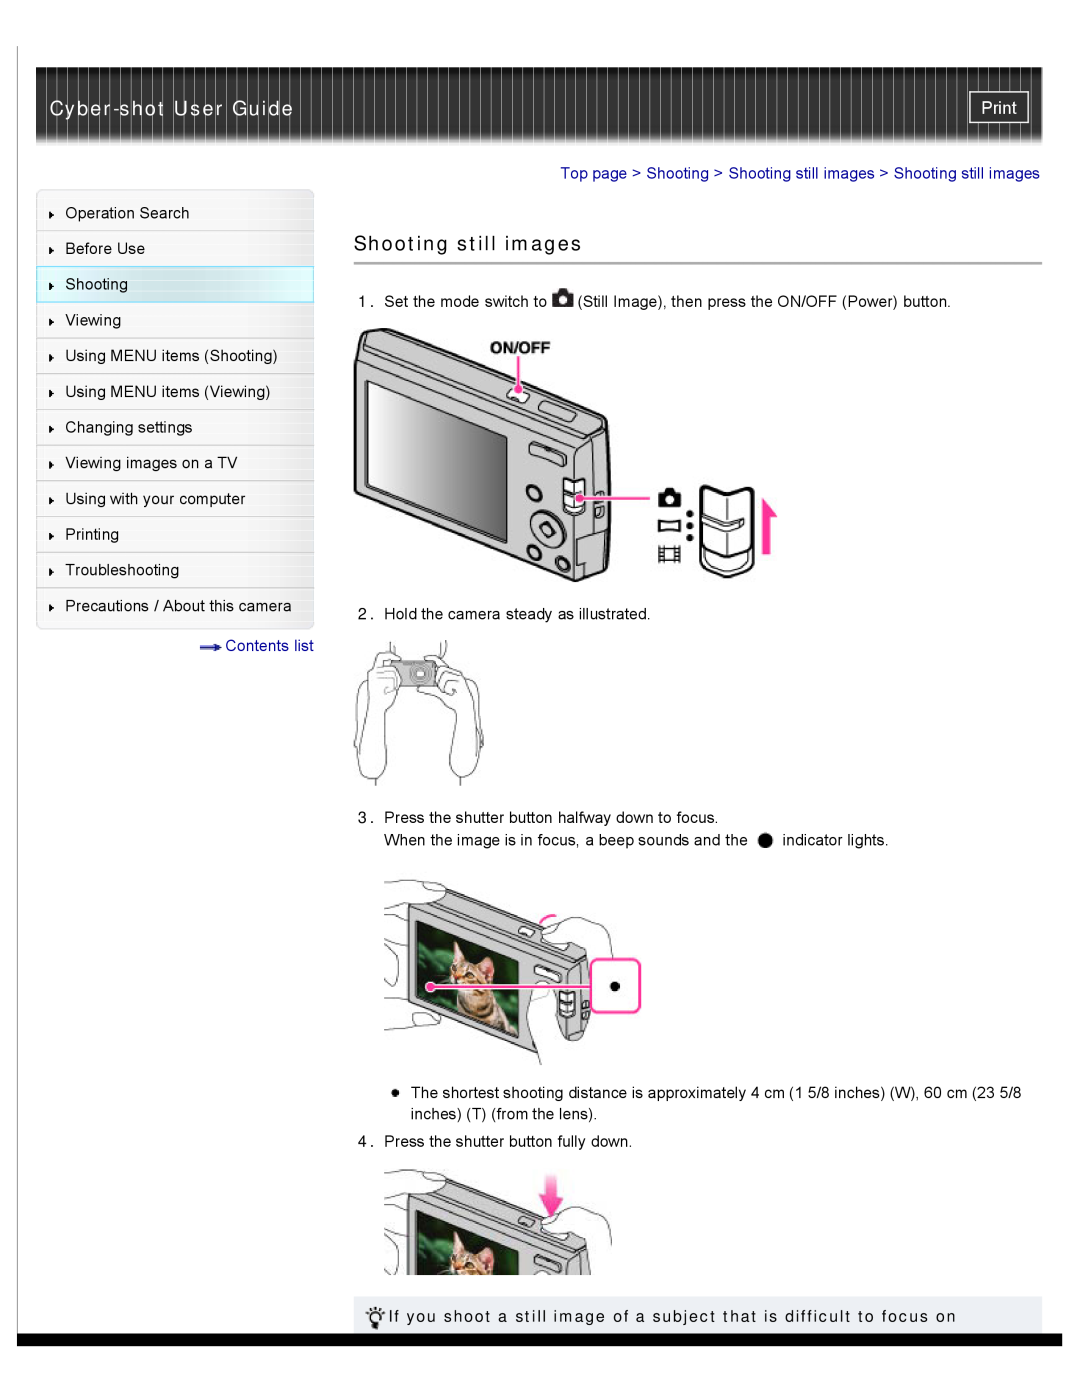 Sony DSC-W510 manual Shooting still images, Cyber-shot User Guide, Print, Contents list 